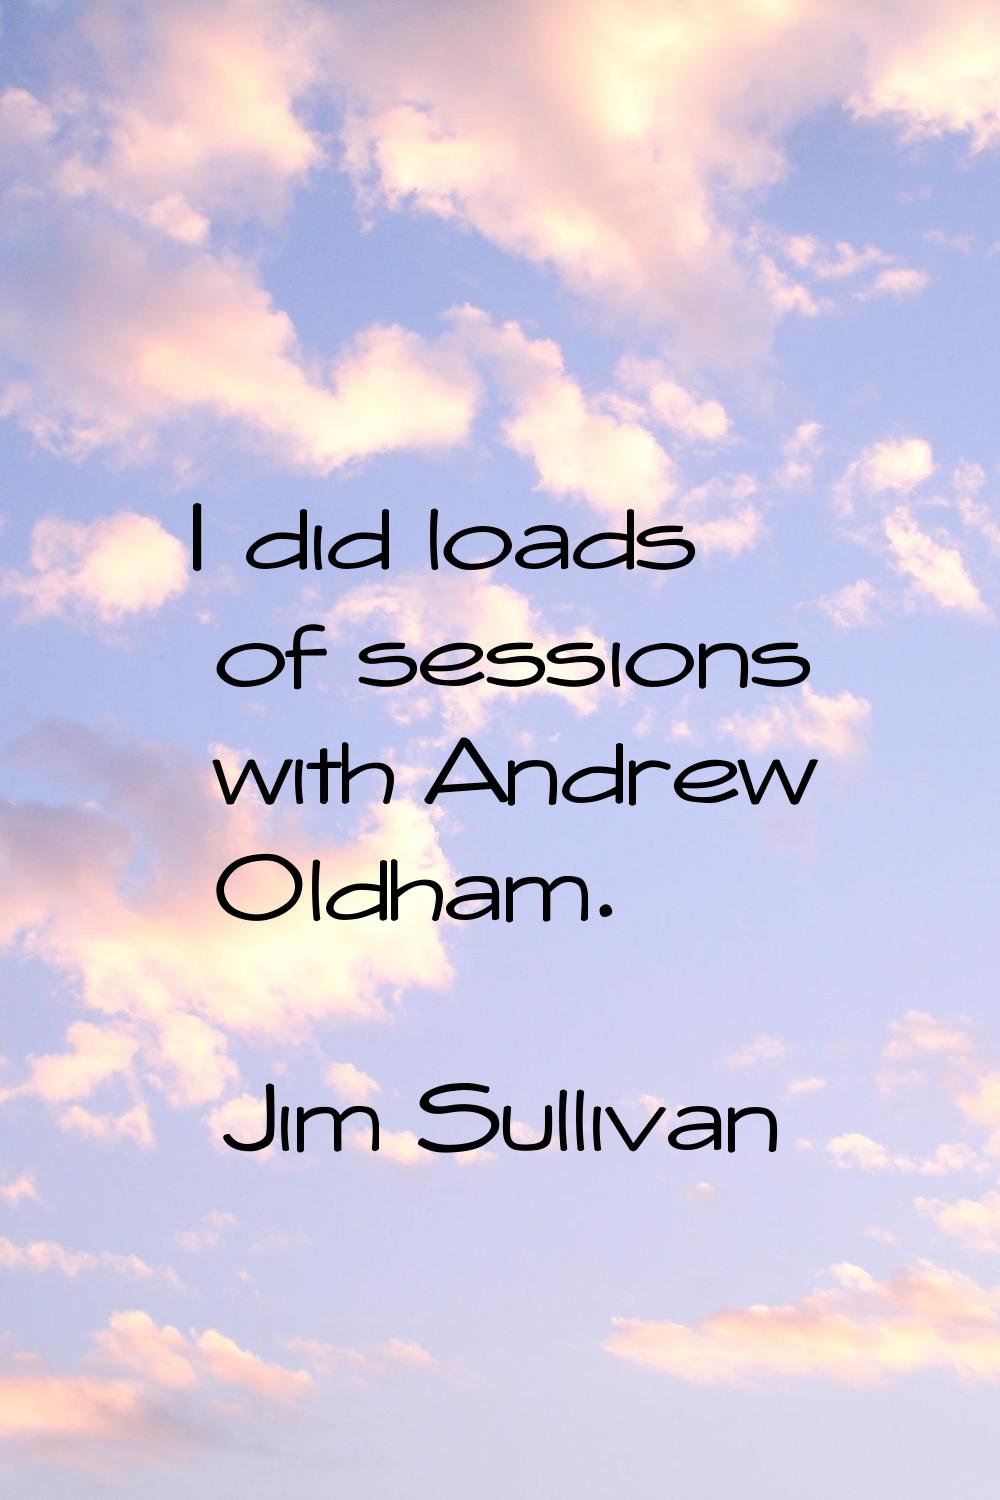 I did loads of sessions with Andrew Oldham.